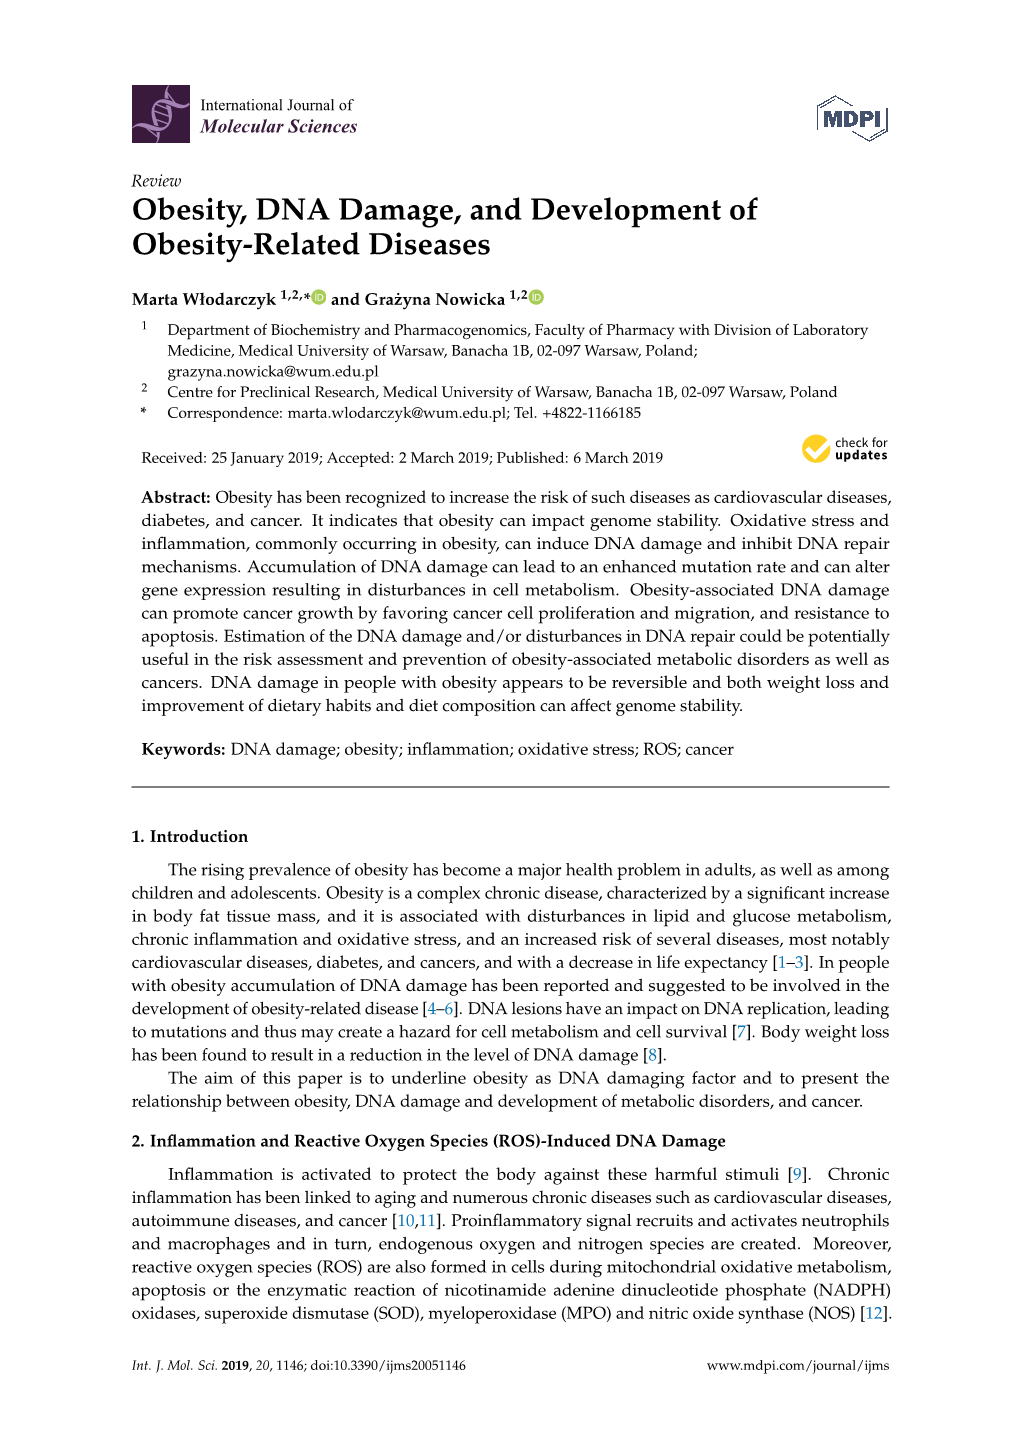 Obesity, DNA Damage, and Development of Obesity-Related Diseases